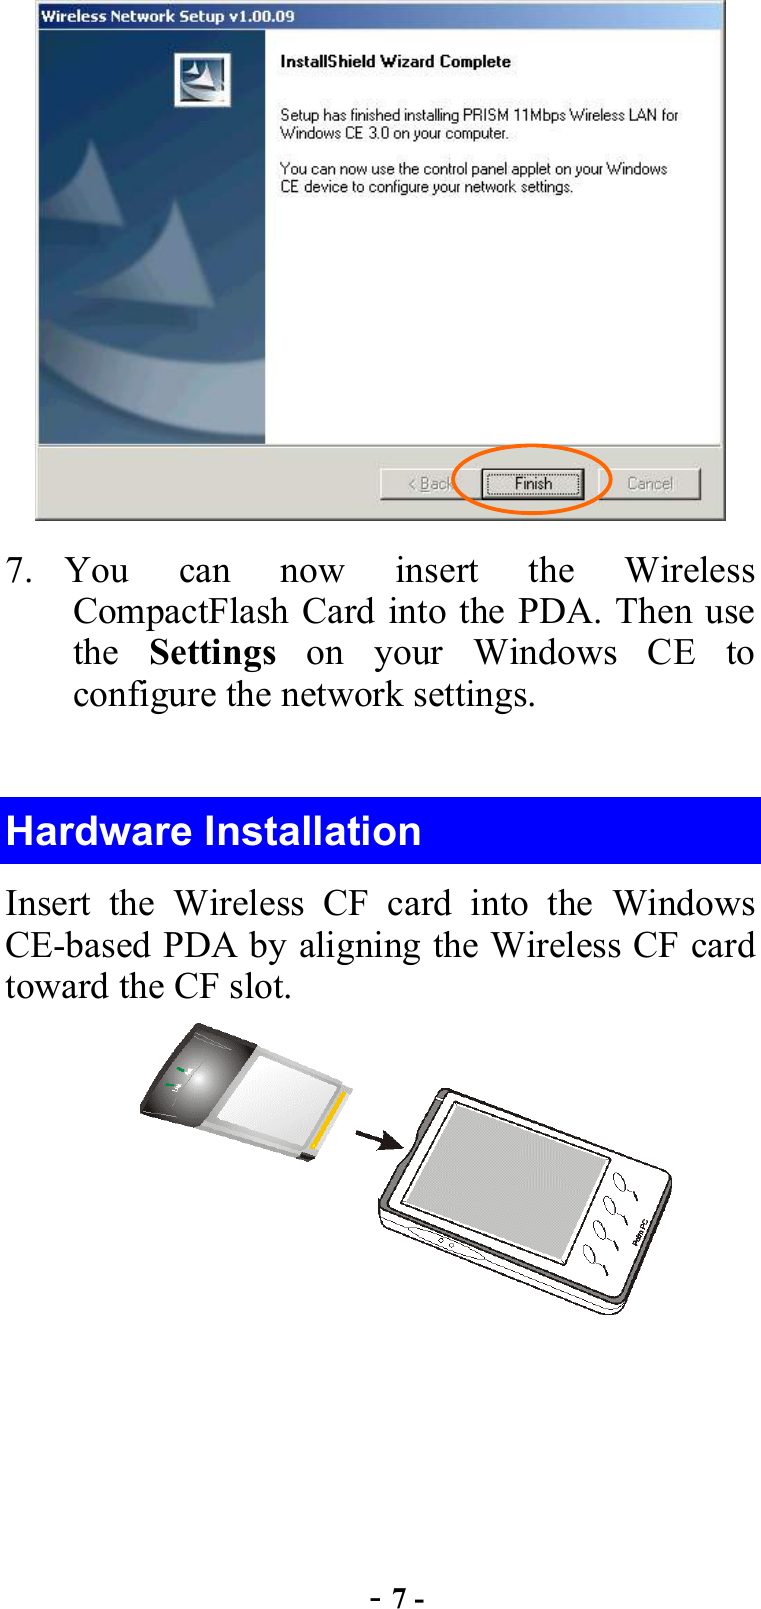  - 7 -  7. You can now insert the Wireless CompactFlash Card into the PDA. Then use the  Settings on your Windows CE to configure the network settings.    Hardware Installation Insert the Wireless CF card into the Windows CE-based PDA by aligning the Wireless CF card toward the CF slot.  